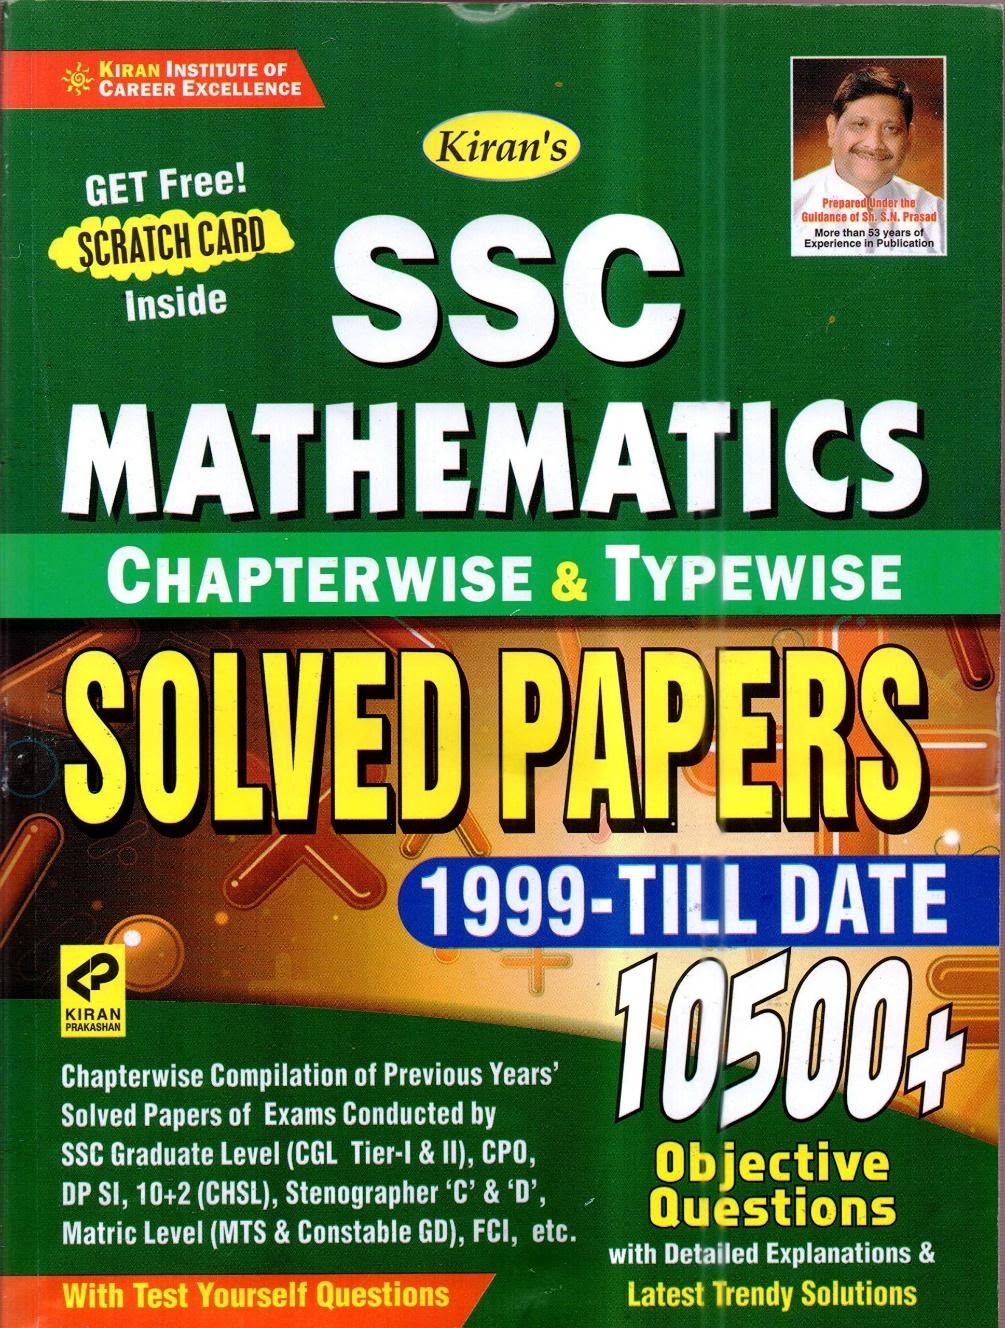 Buy Kiran SSC Mathematics Chapterwise & Typewise Solved Papers 1999 Till  Date 9500+ Objective Questions For SSC CGL Tier I & II, SSC CHSL, SSC ...  Police, SSC CPO, Etc. English(Old Edition)